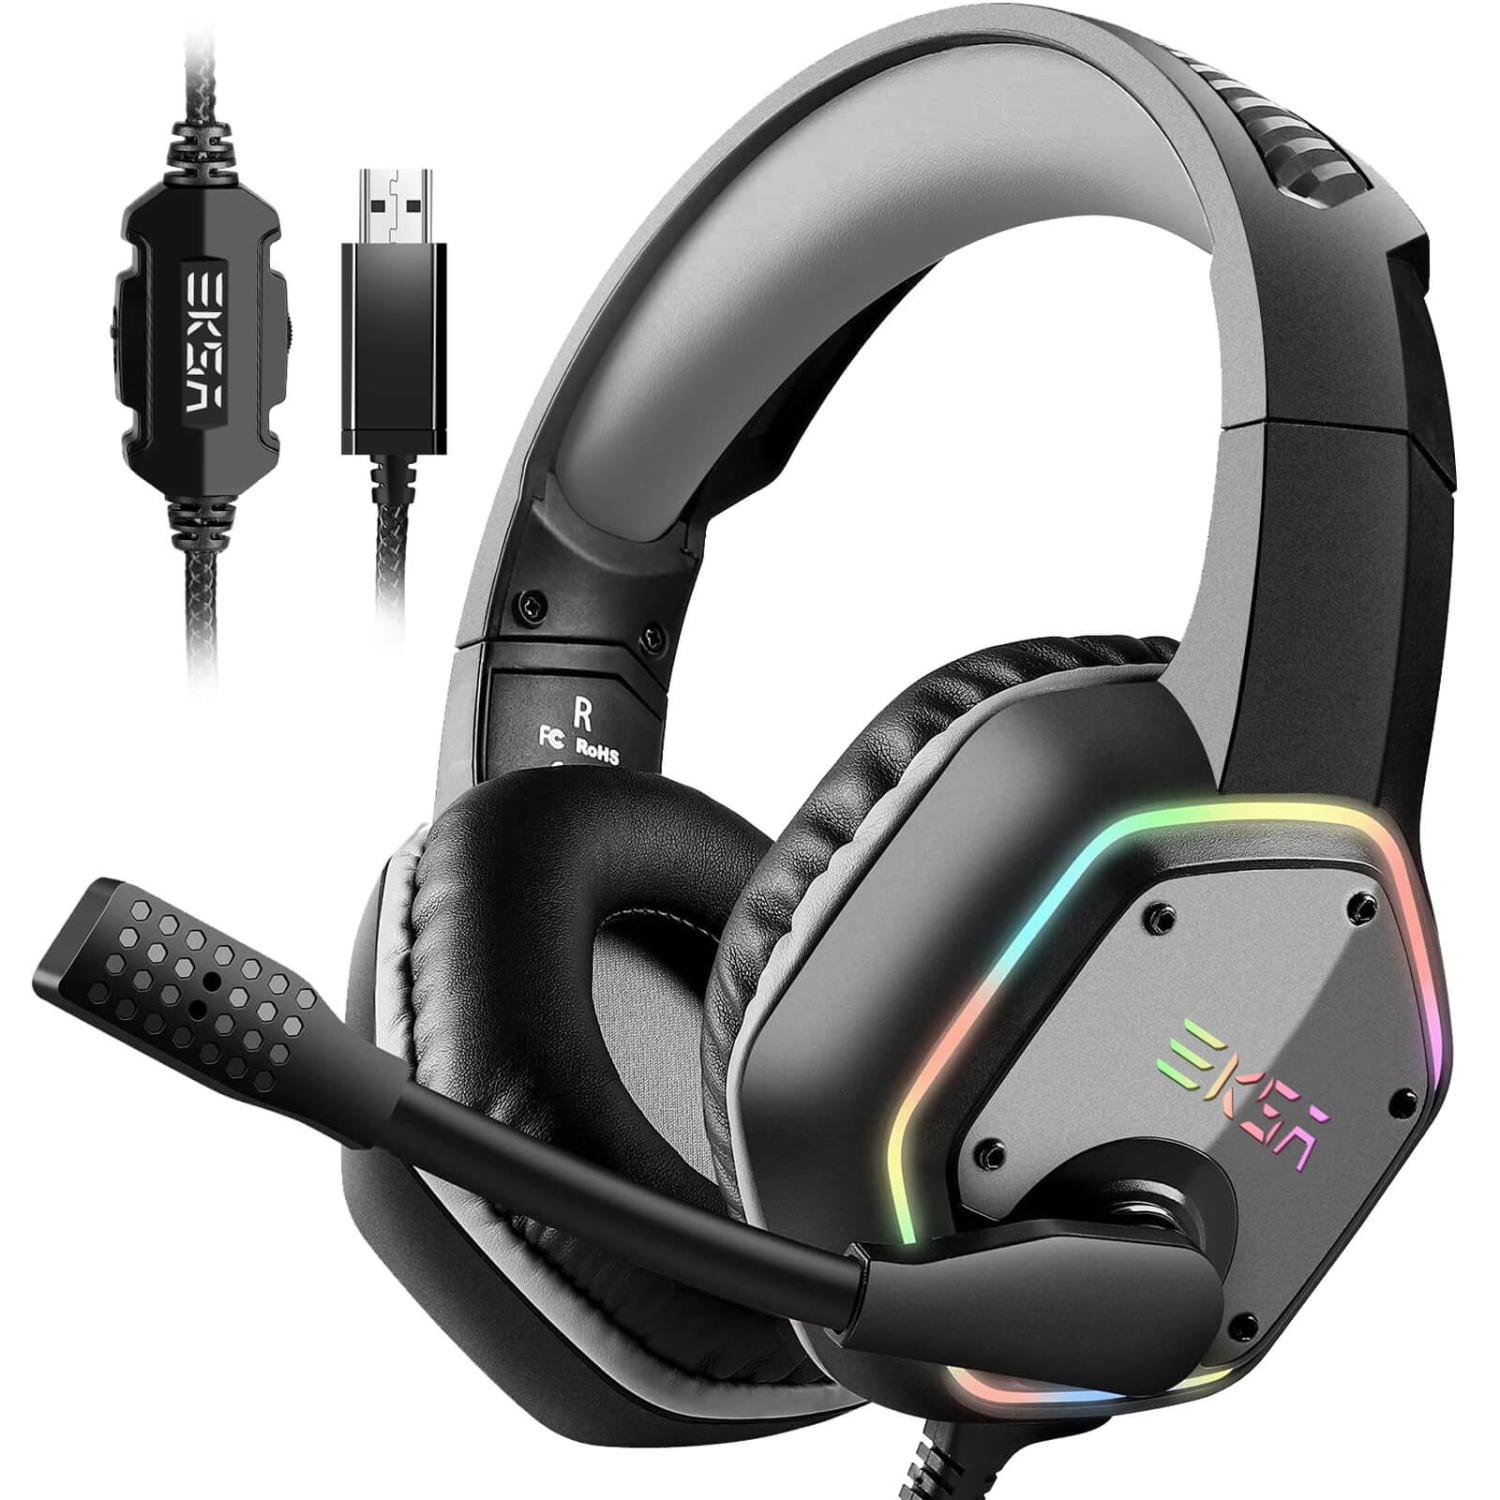 EKSA E1000 USB Gaming Headset for PC, Computer Headphones with Microphone/Mic Noise Cancelling, 7.1 Surround Sound, RGB Light - Wired Headphones for PS4, PS5 Console, Laptop